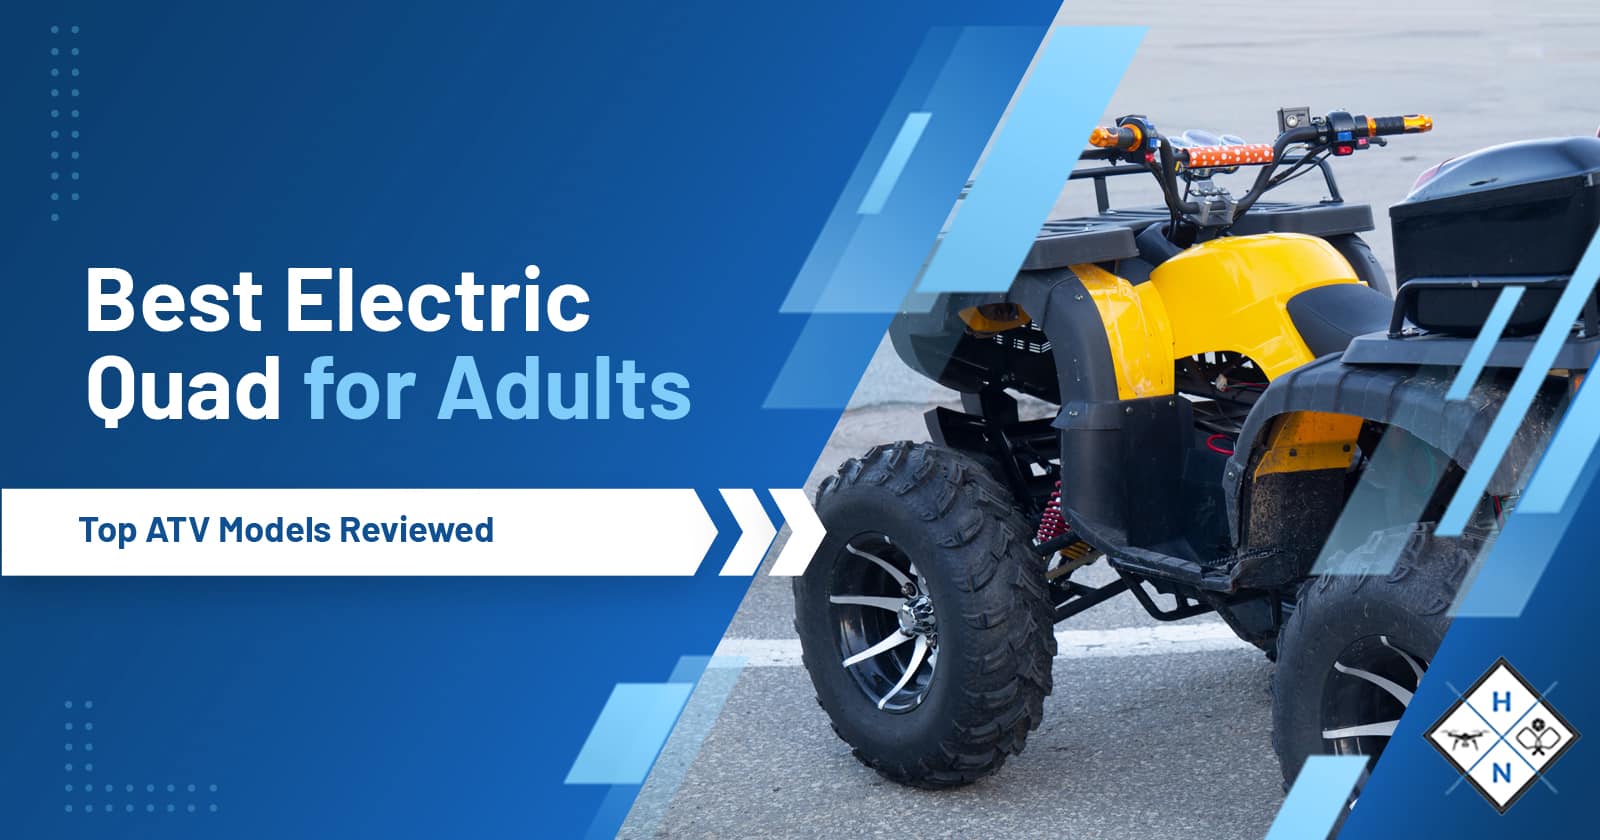 Best Electric Quad for Adults – Top ATV Models Reviewed